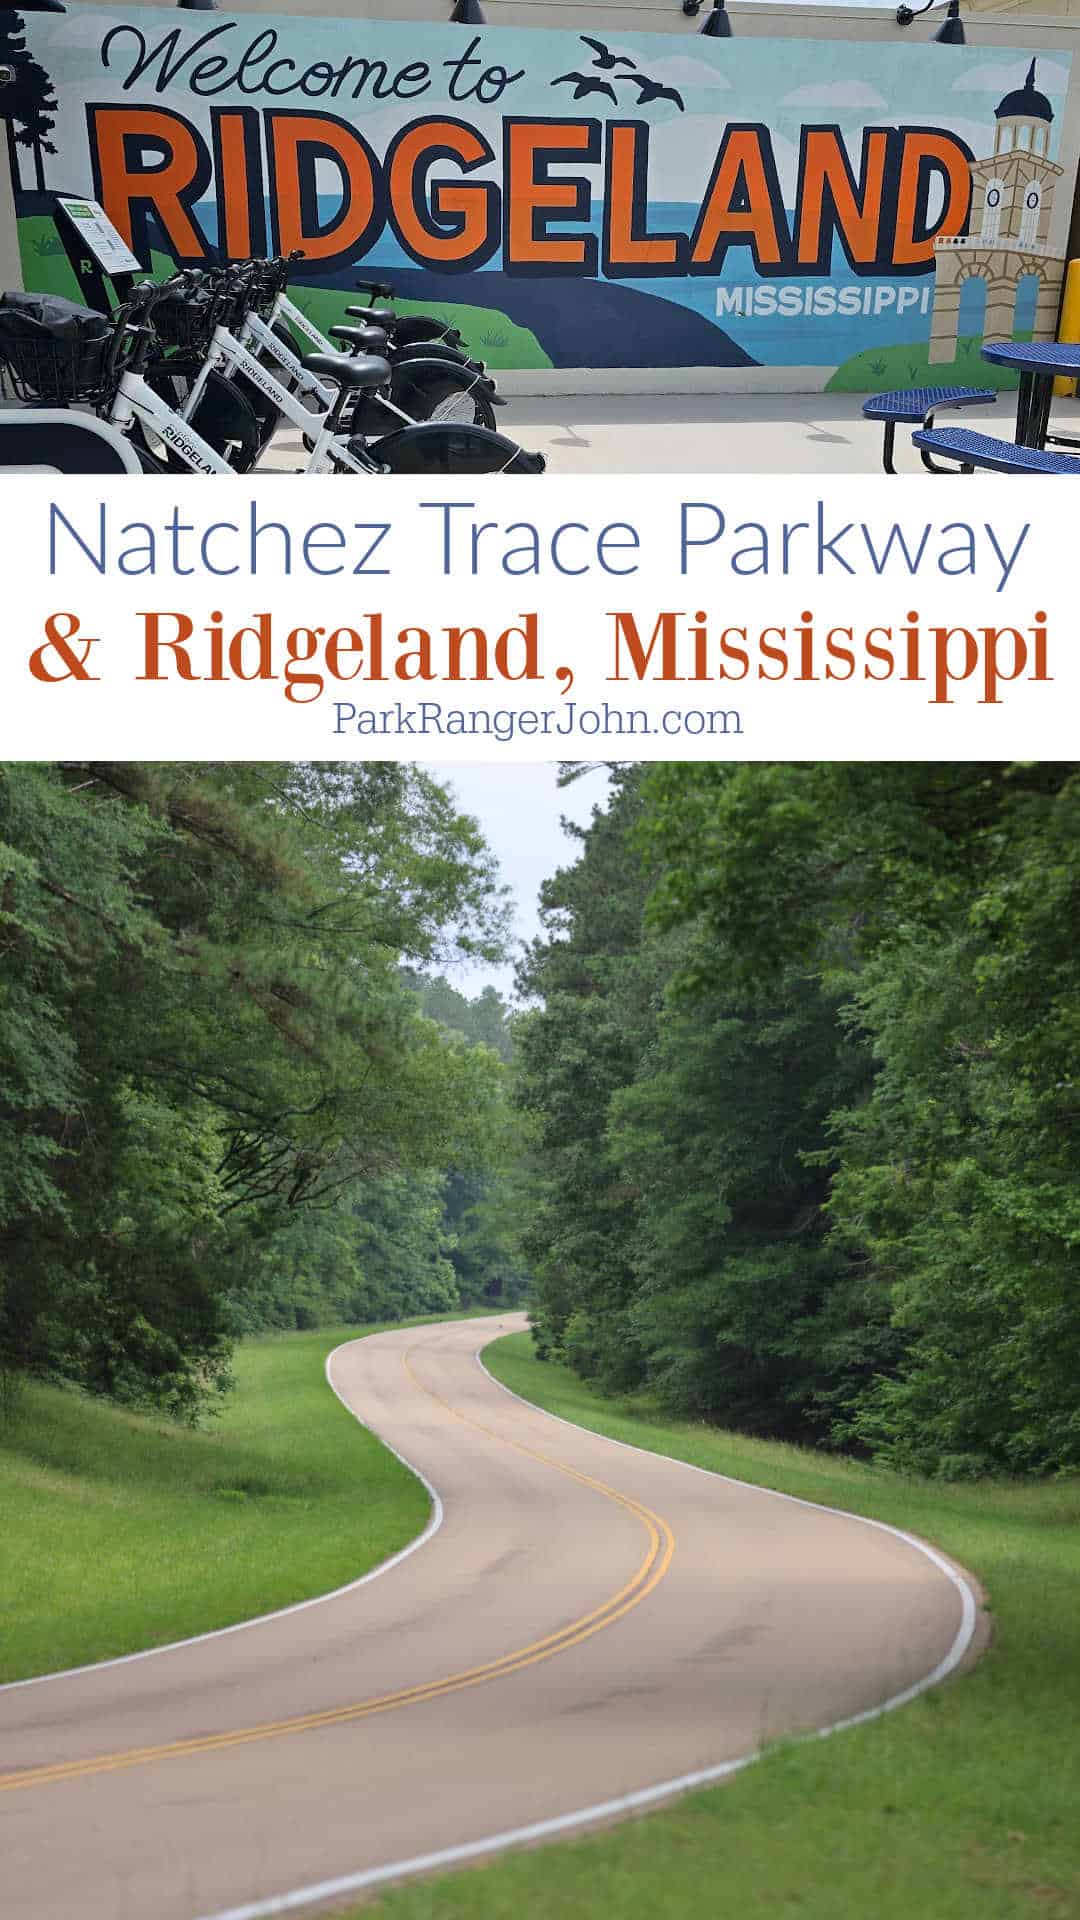 Photo of the Natchez Trace Parkway with text reading "Natchez Trace Parkway & Ridgeland, MS Trip Report by ParkRangerJohn.com"